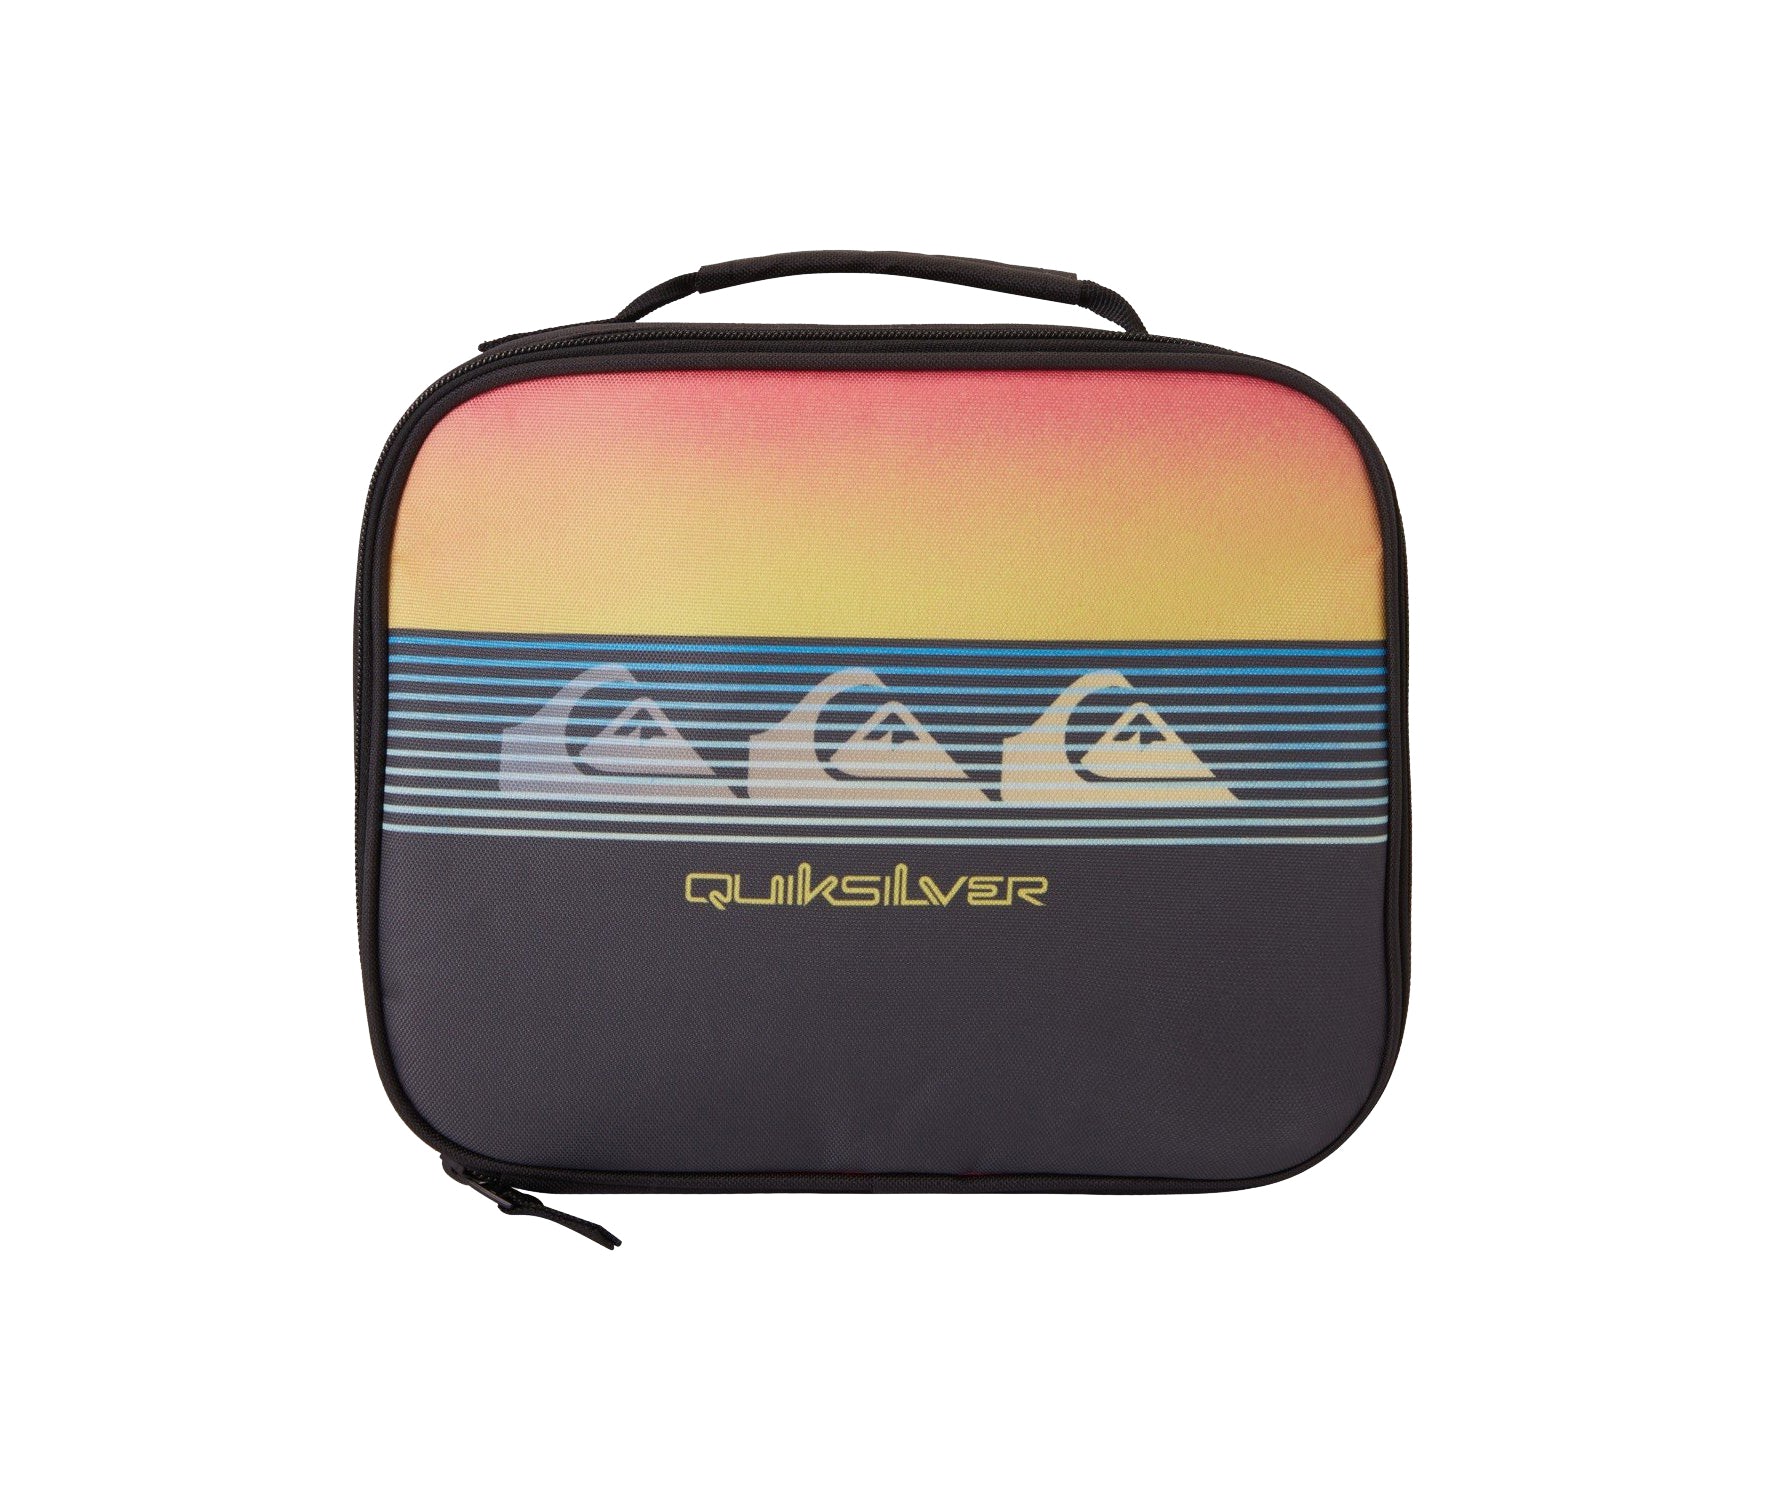 Quiksilver Boys 8-16 Lunch Boxer Lunch Box KZM6 OS